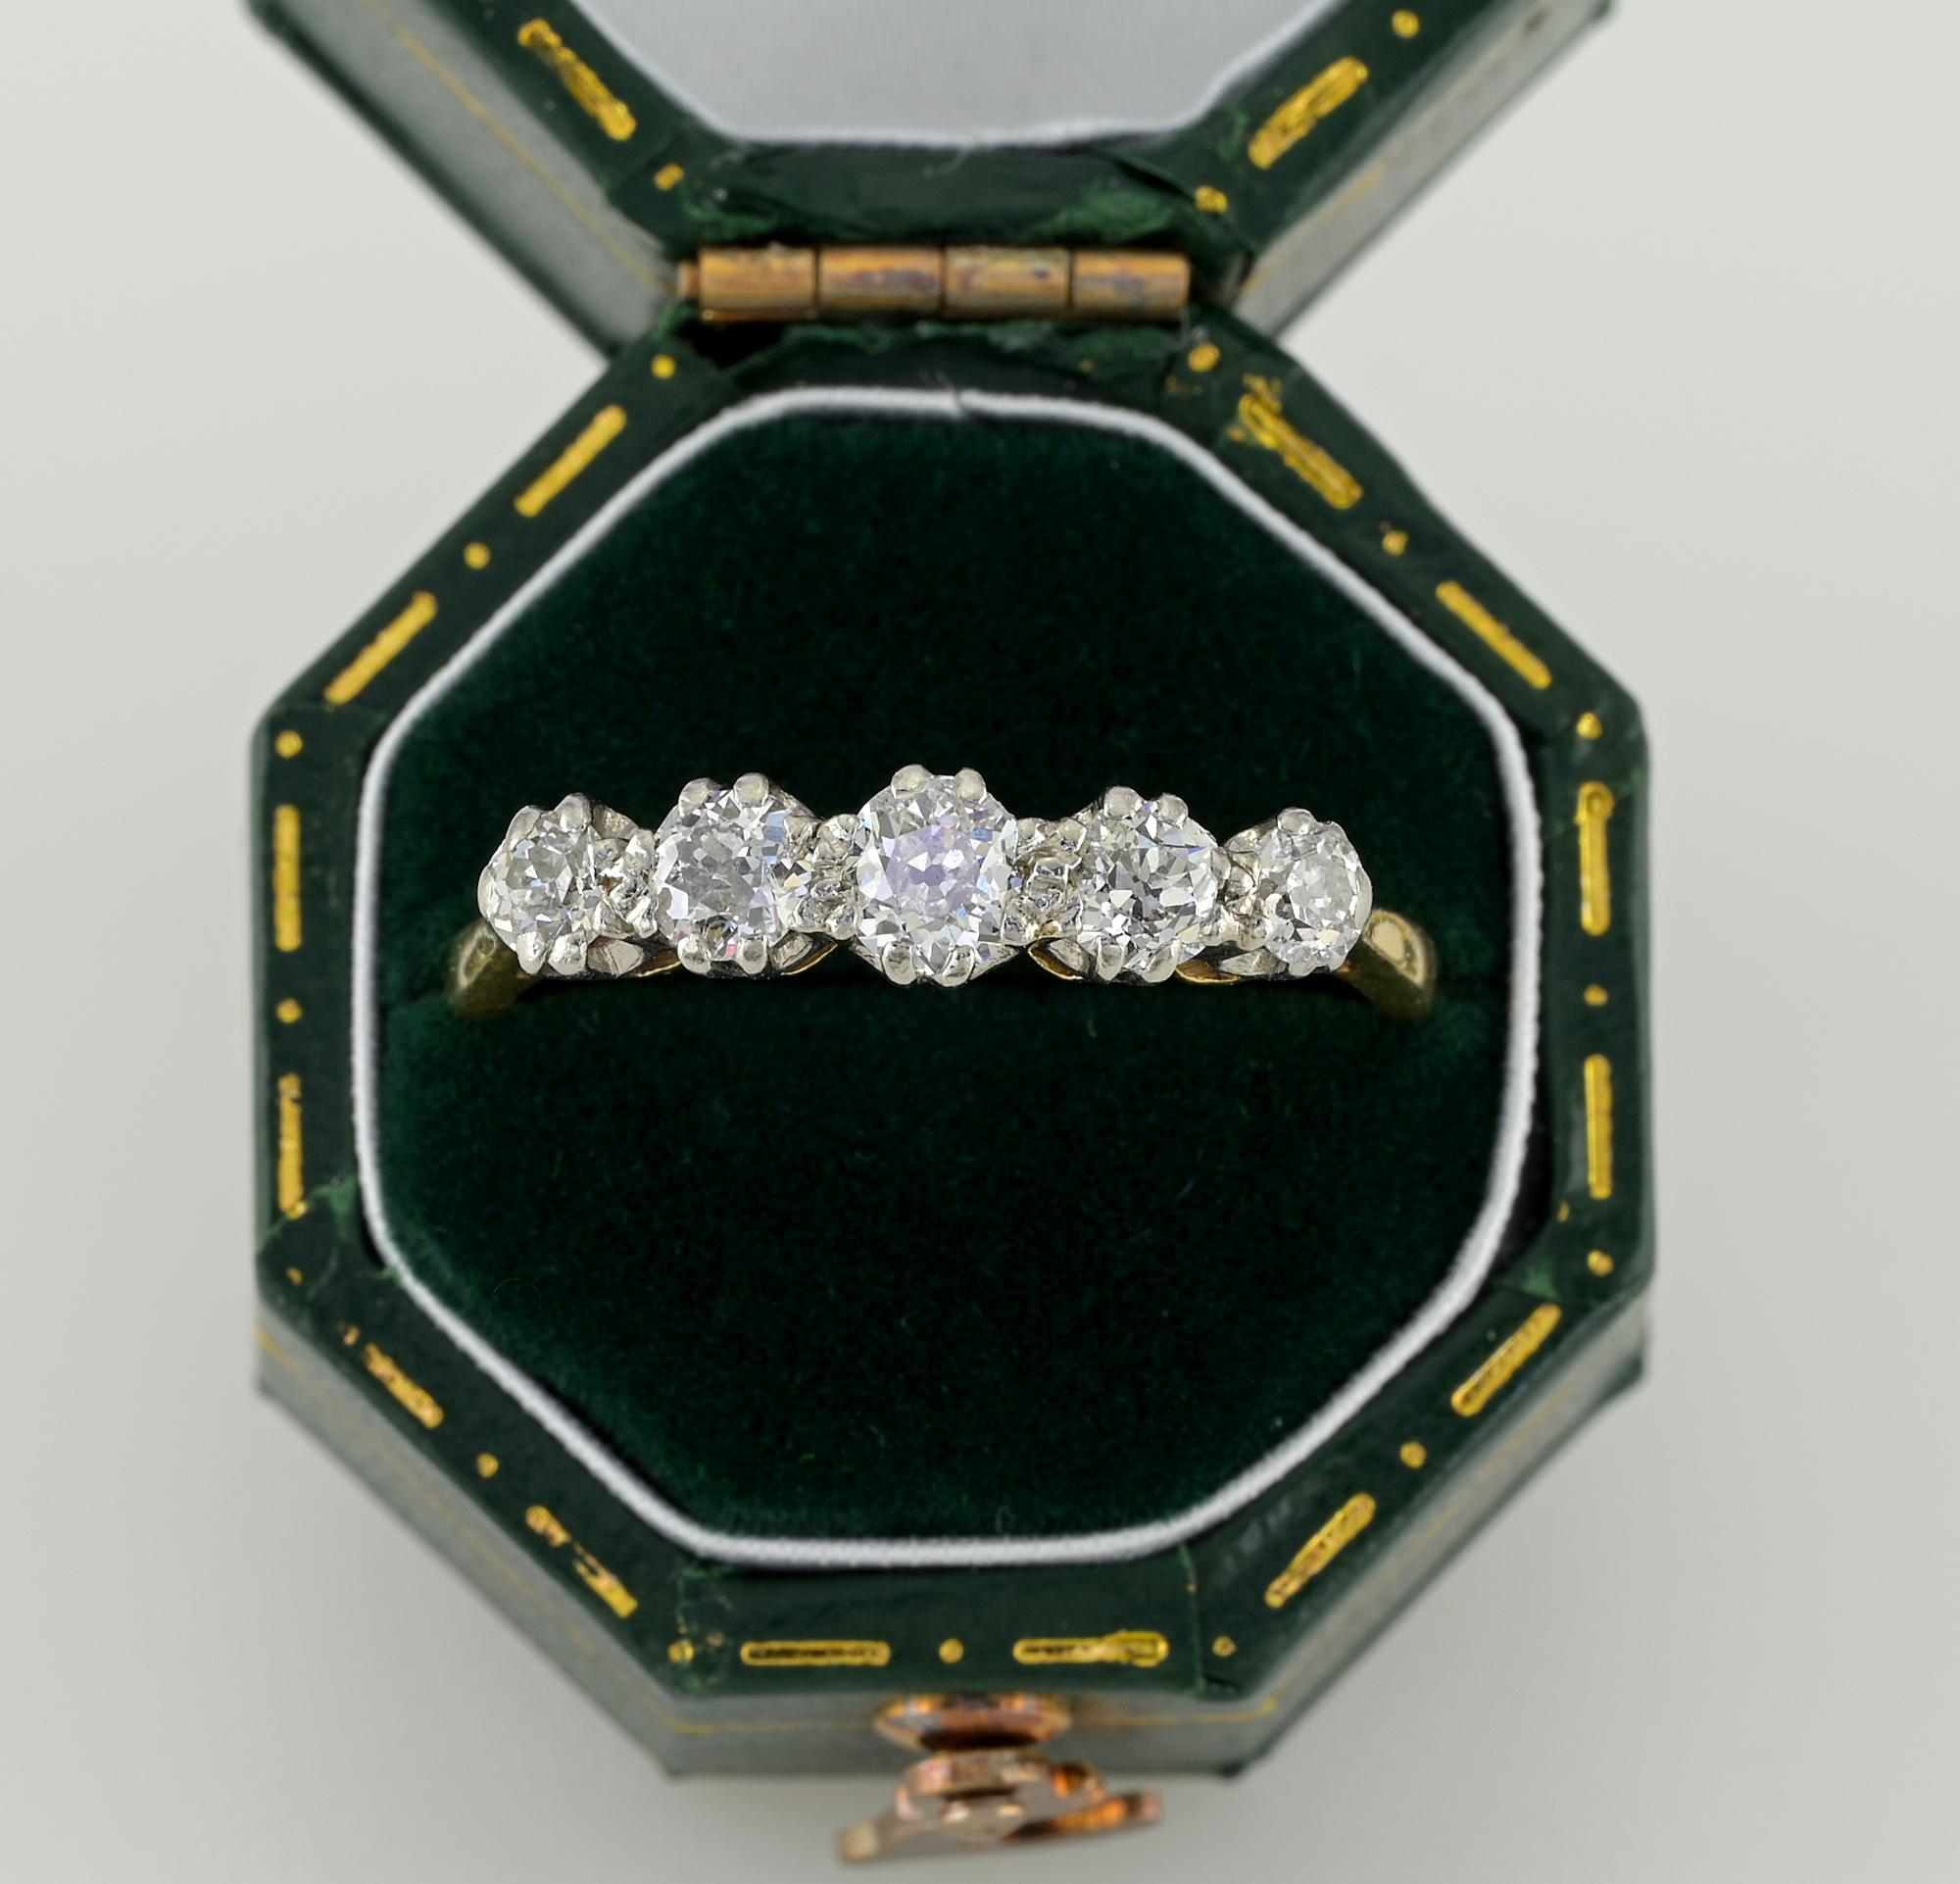 This pretty antique five stone ring is 1920 ca.
Hand crafted of solid 18 KT gold and Platinum
Traditional five stone setting with uplifted array slightly graduated in size of old mine cut Diamonds for .70 Ct –  larger is .20 Ct. superb in quality